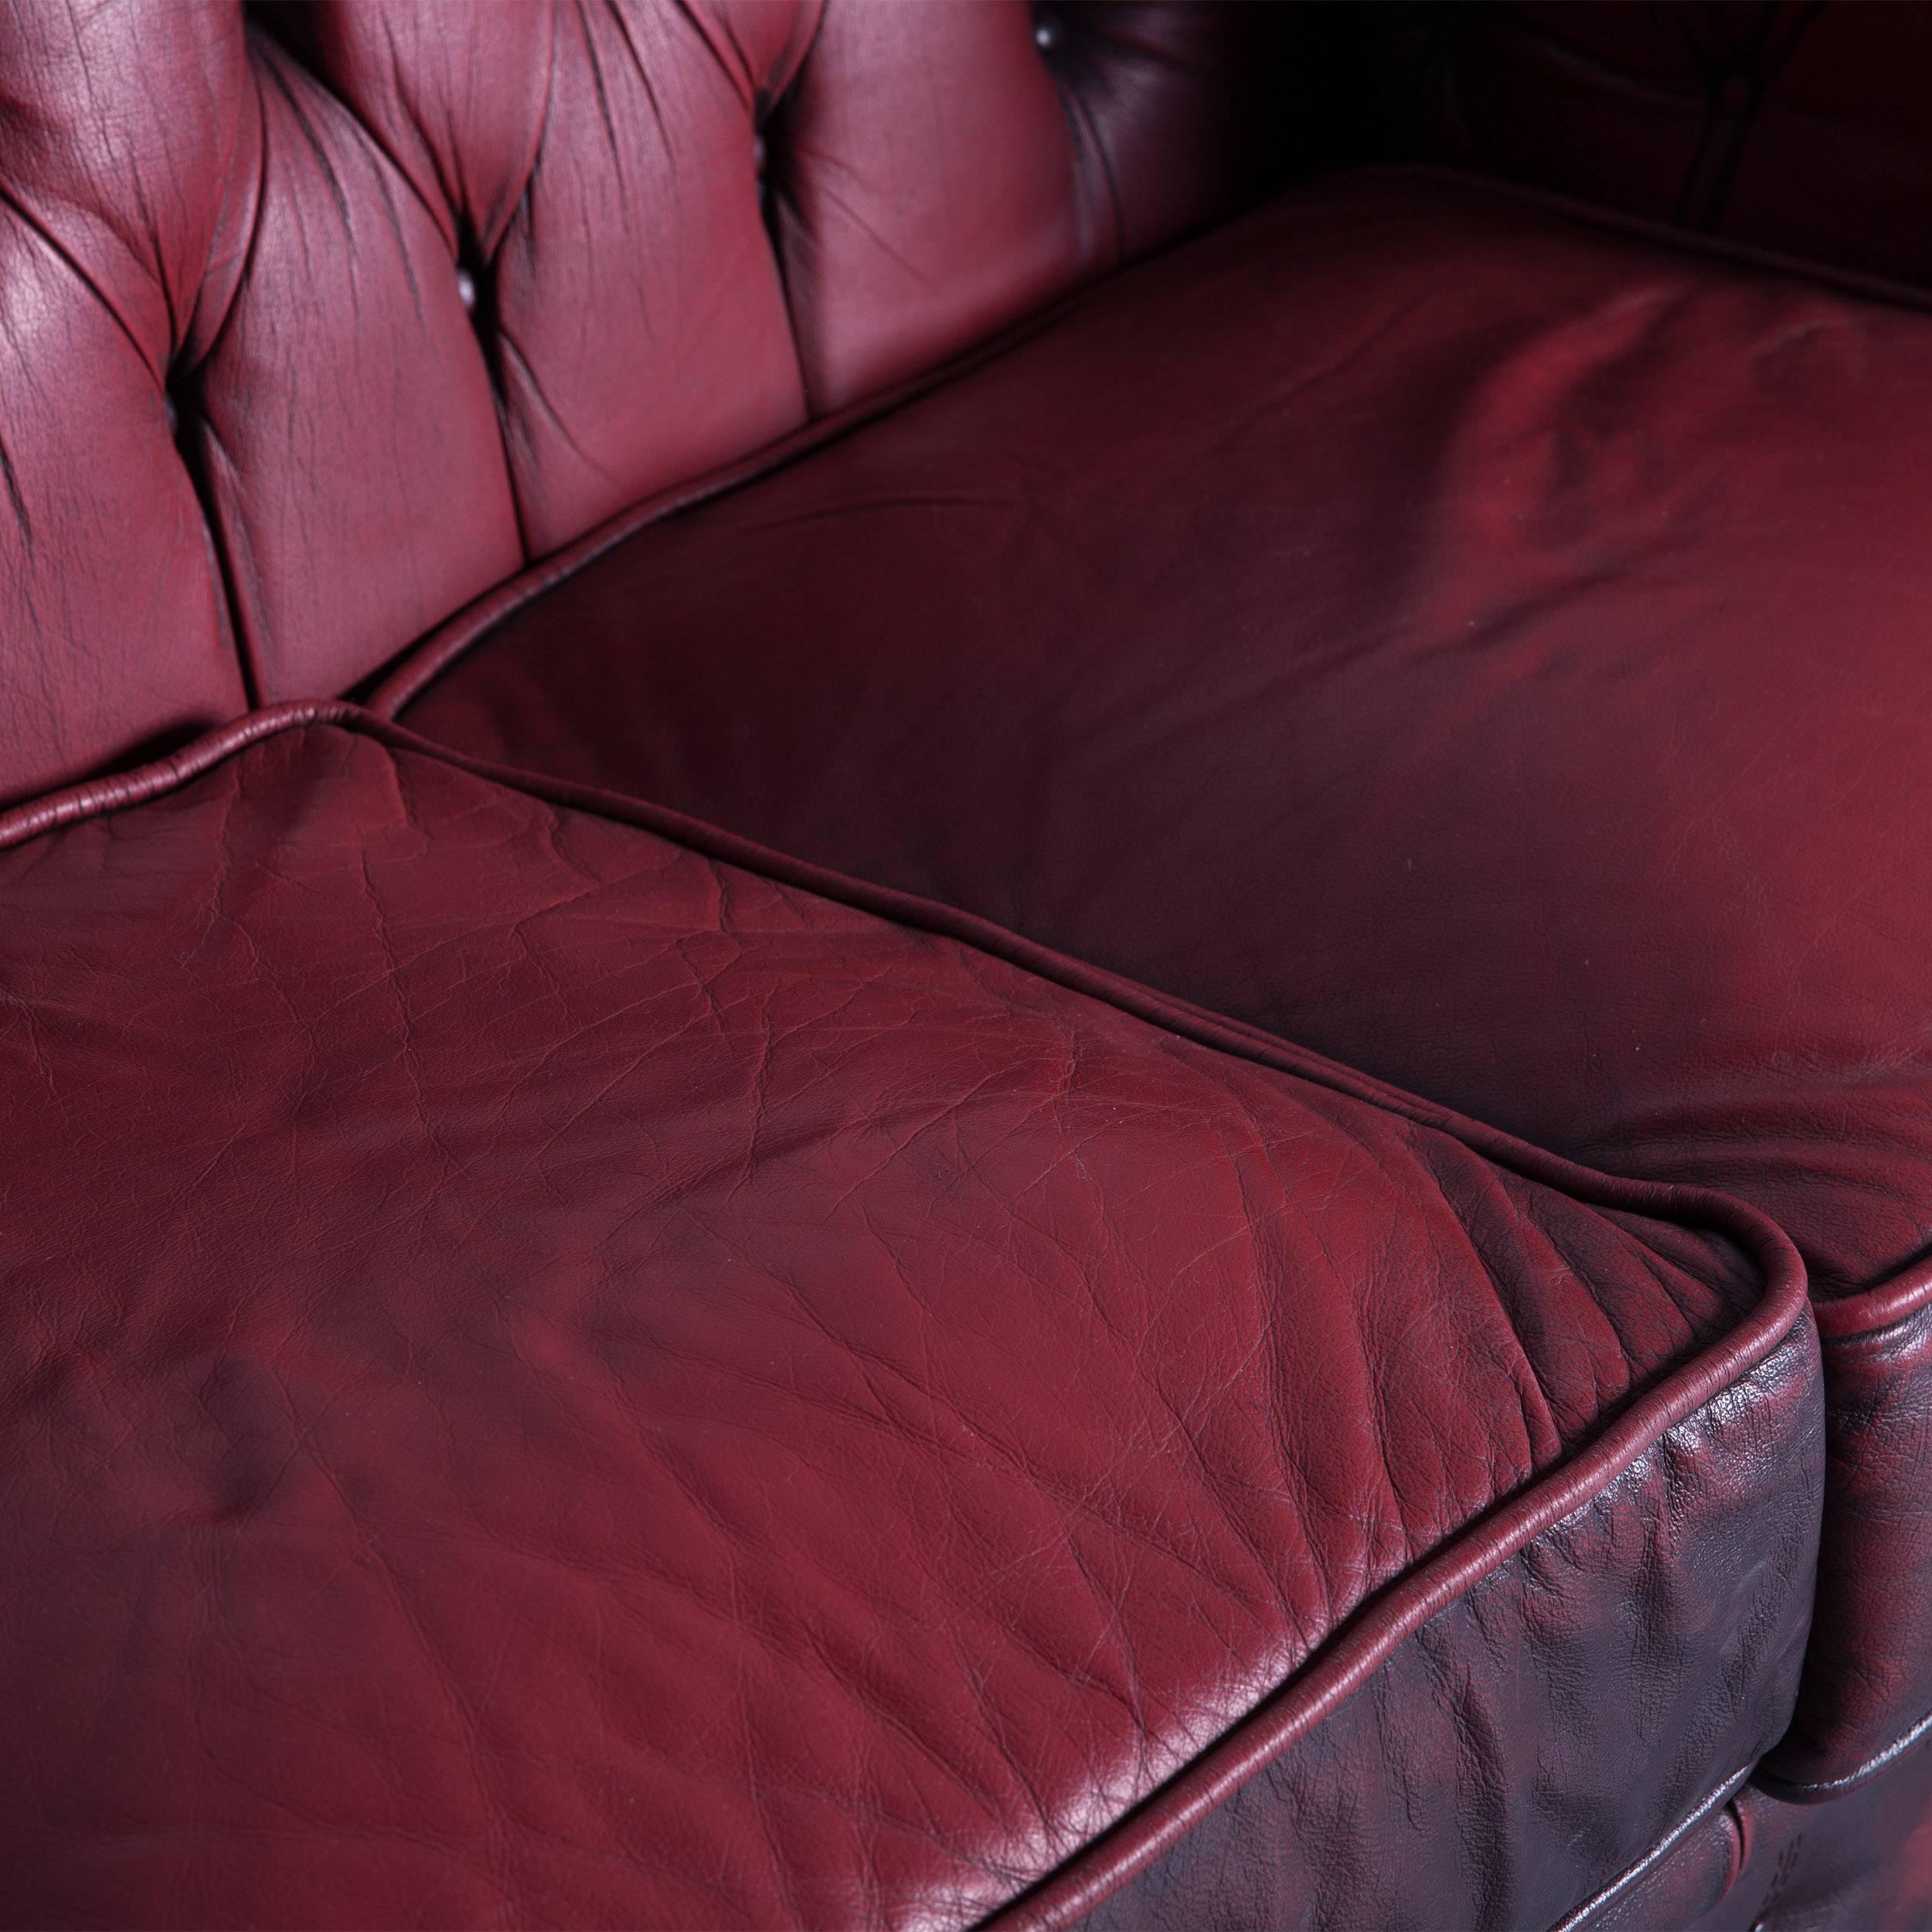 Chesterfield three-seat sofa red leather couch vintage retro rivets, made for pure comfort and elegance.